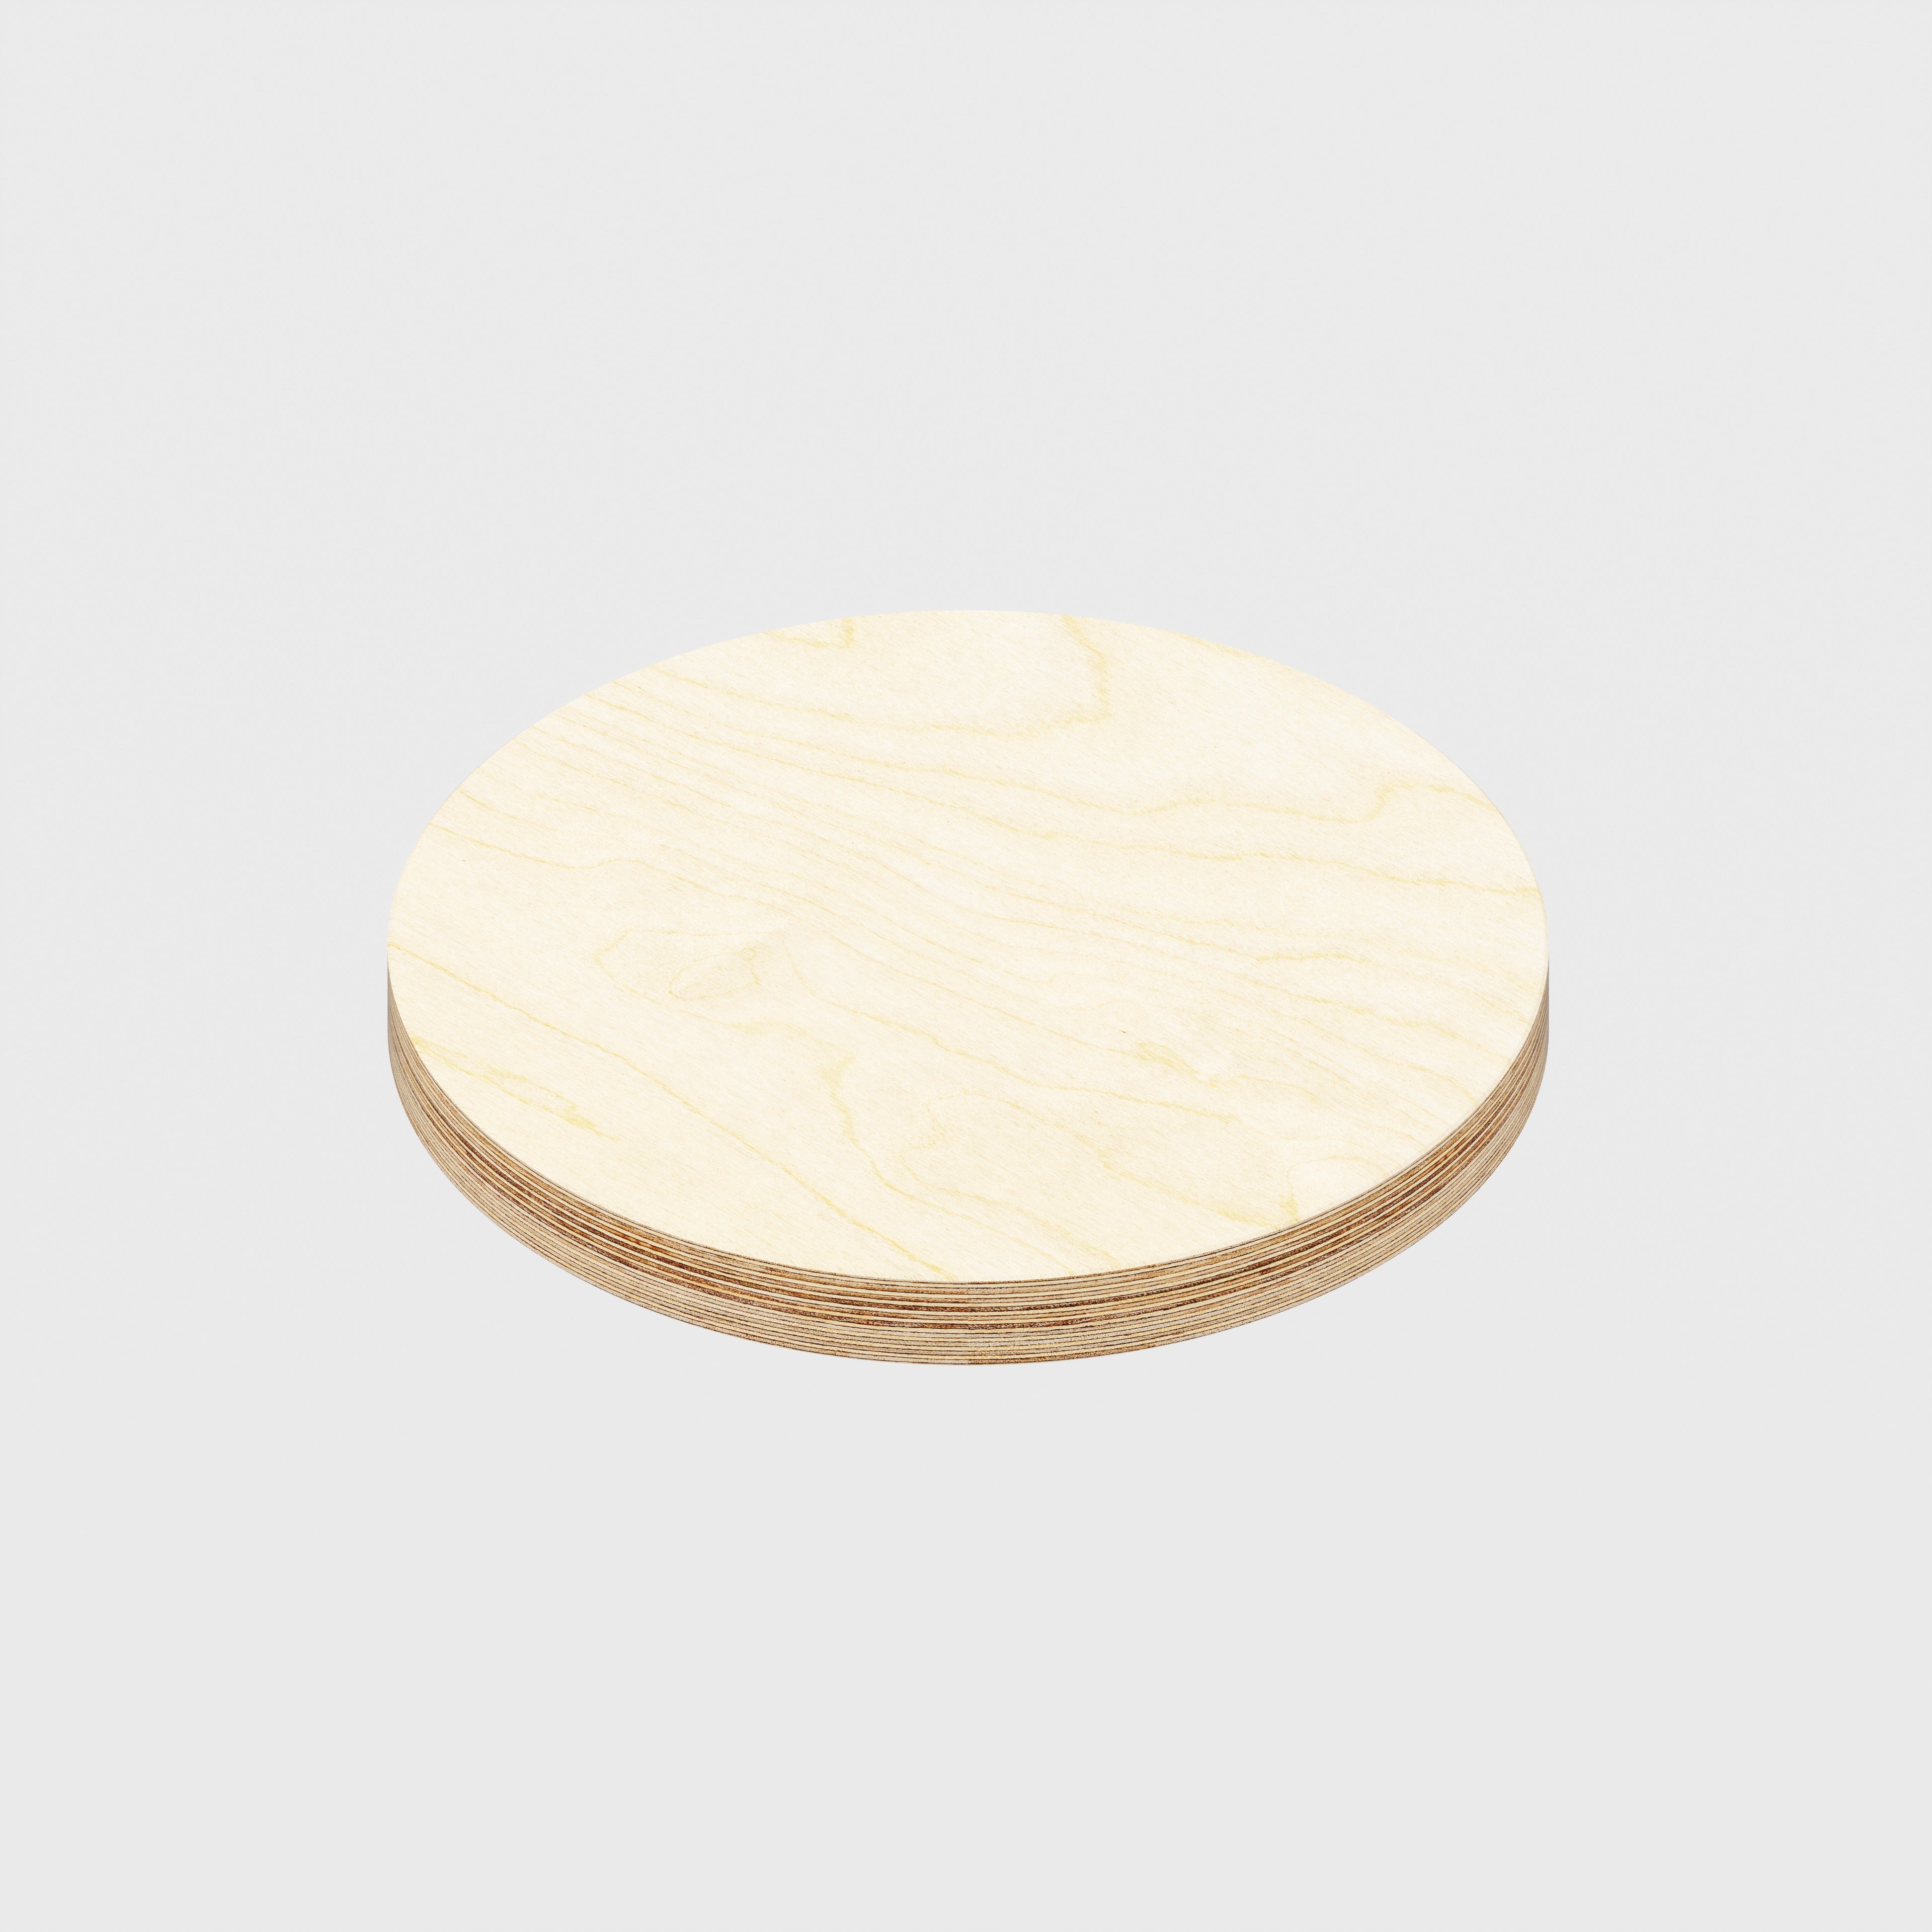 Plywood Stooltop - Plywood Birch - 30mm